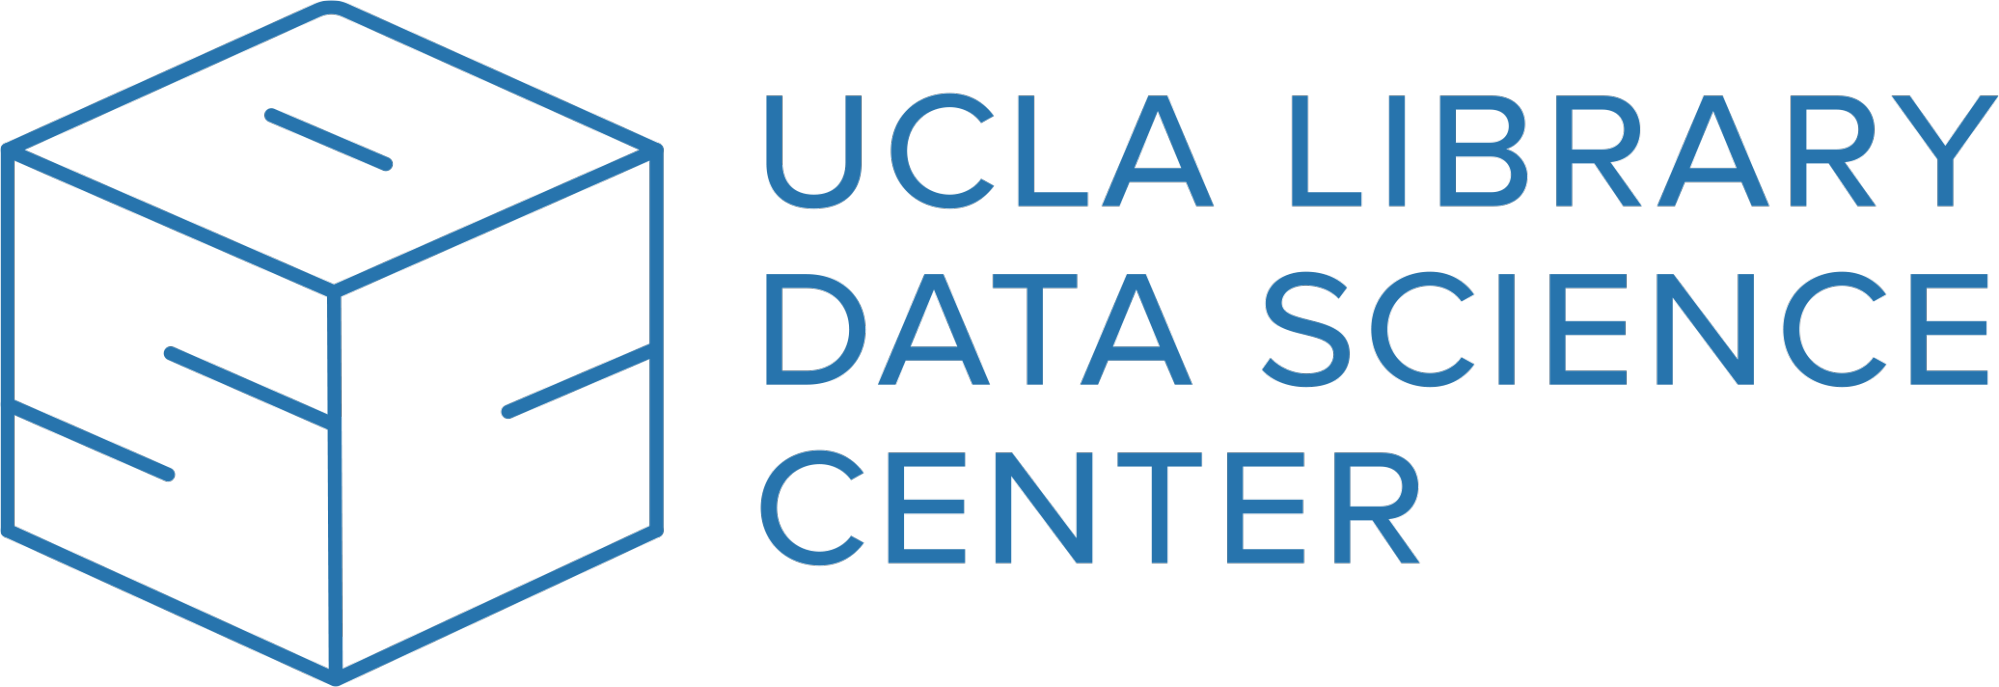 UCLA Library Data Science Center